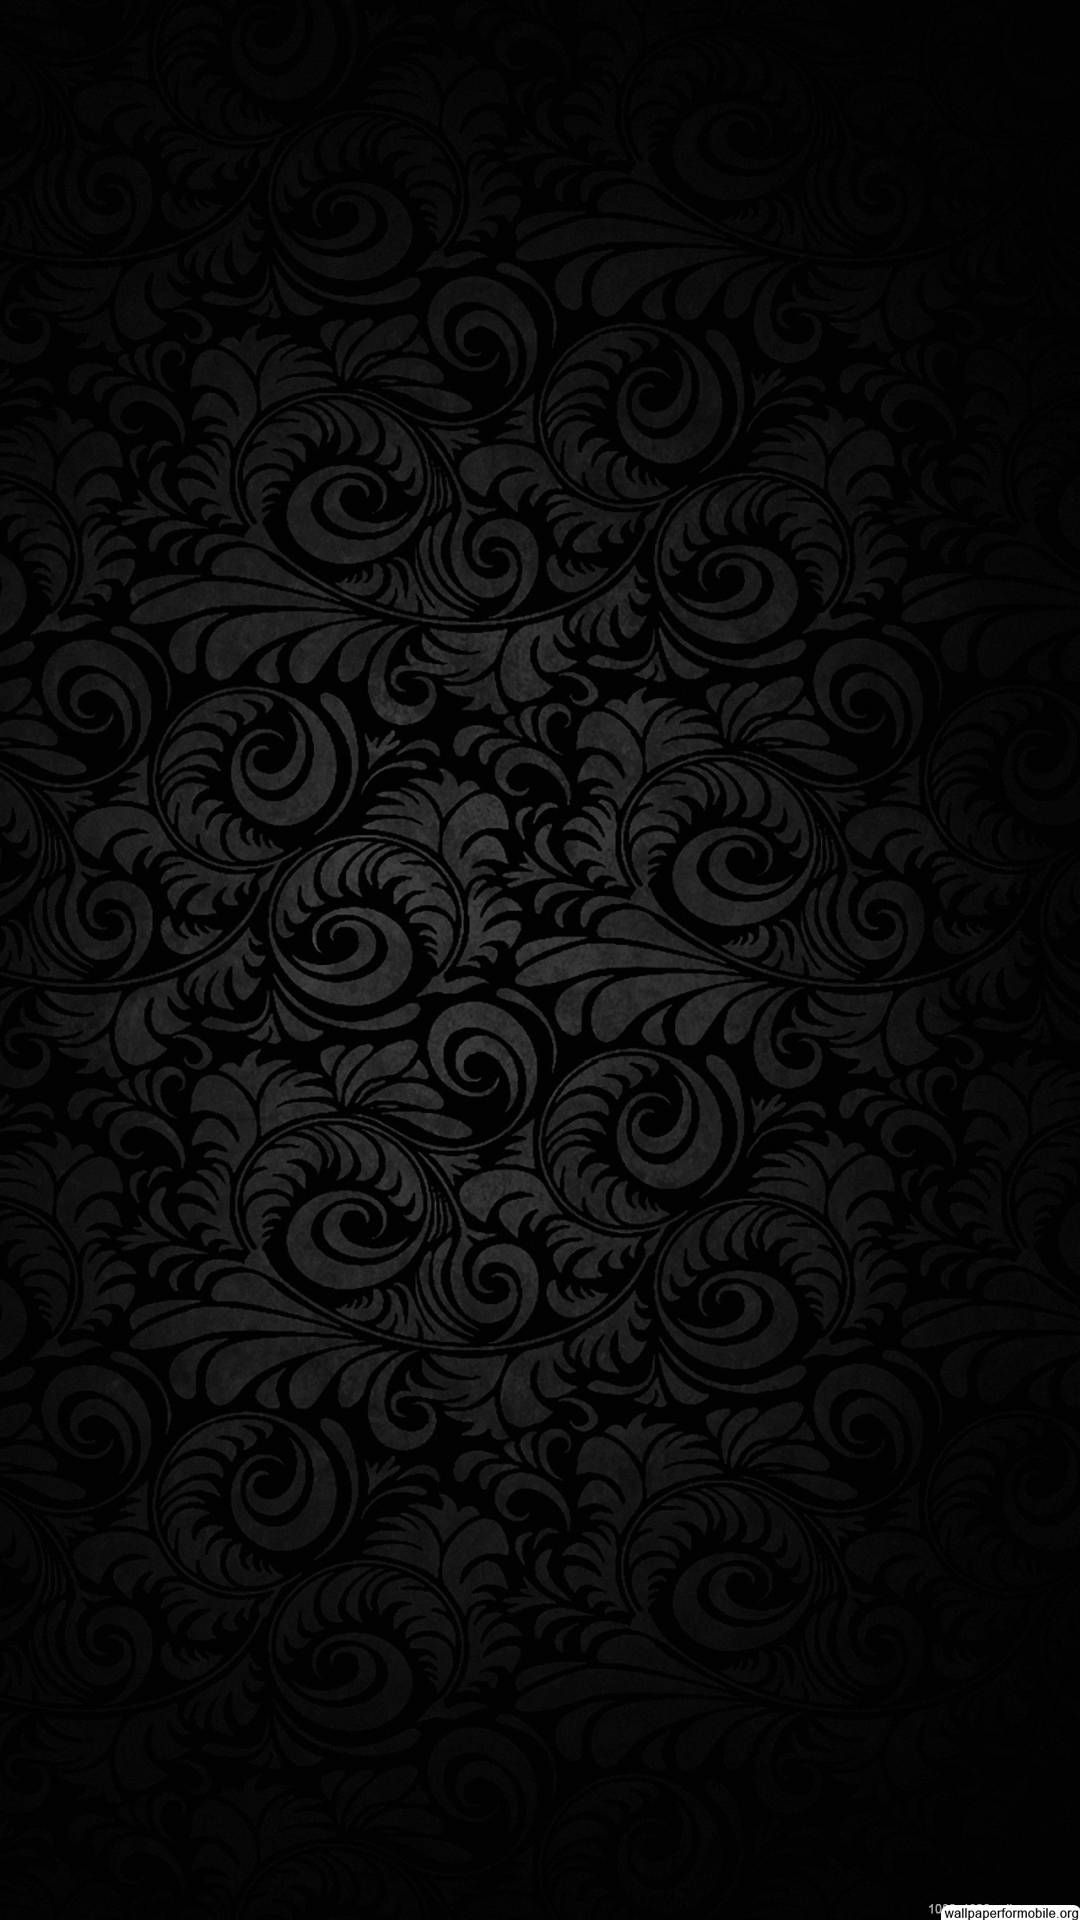 So Ive Got This Thing For Darker Wallpaper Part Mobile In